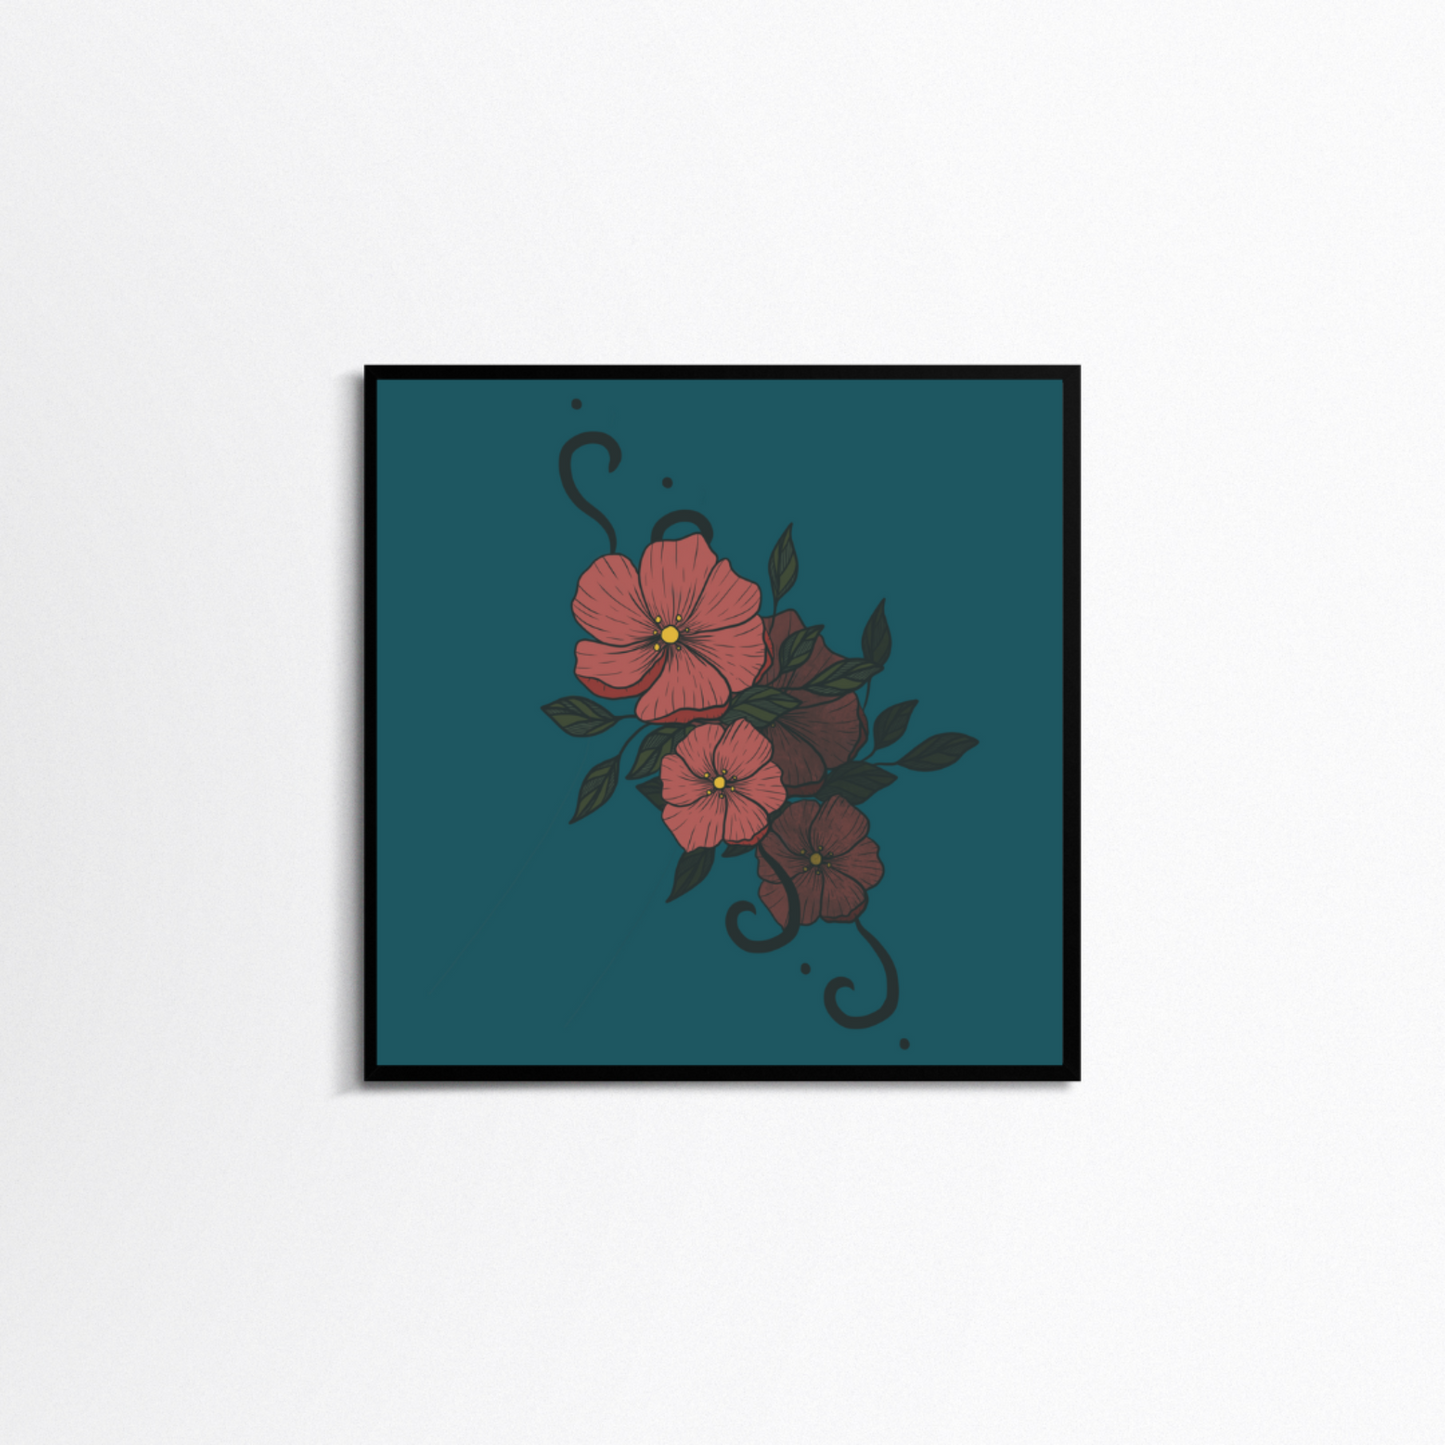 White background with a square black frame. In the frame is a print with a blue background. In the middle is two pink flowers floating with green leaves around it.